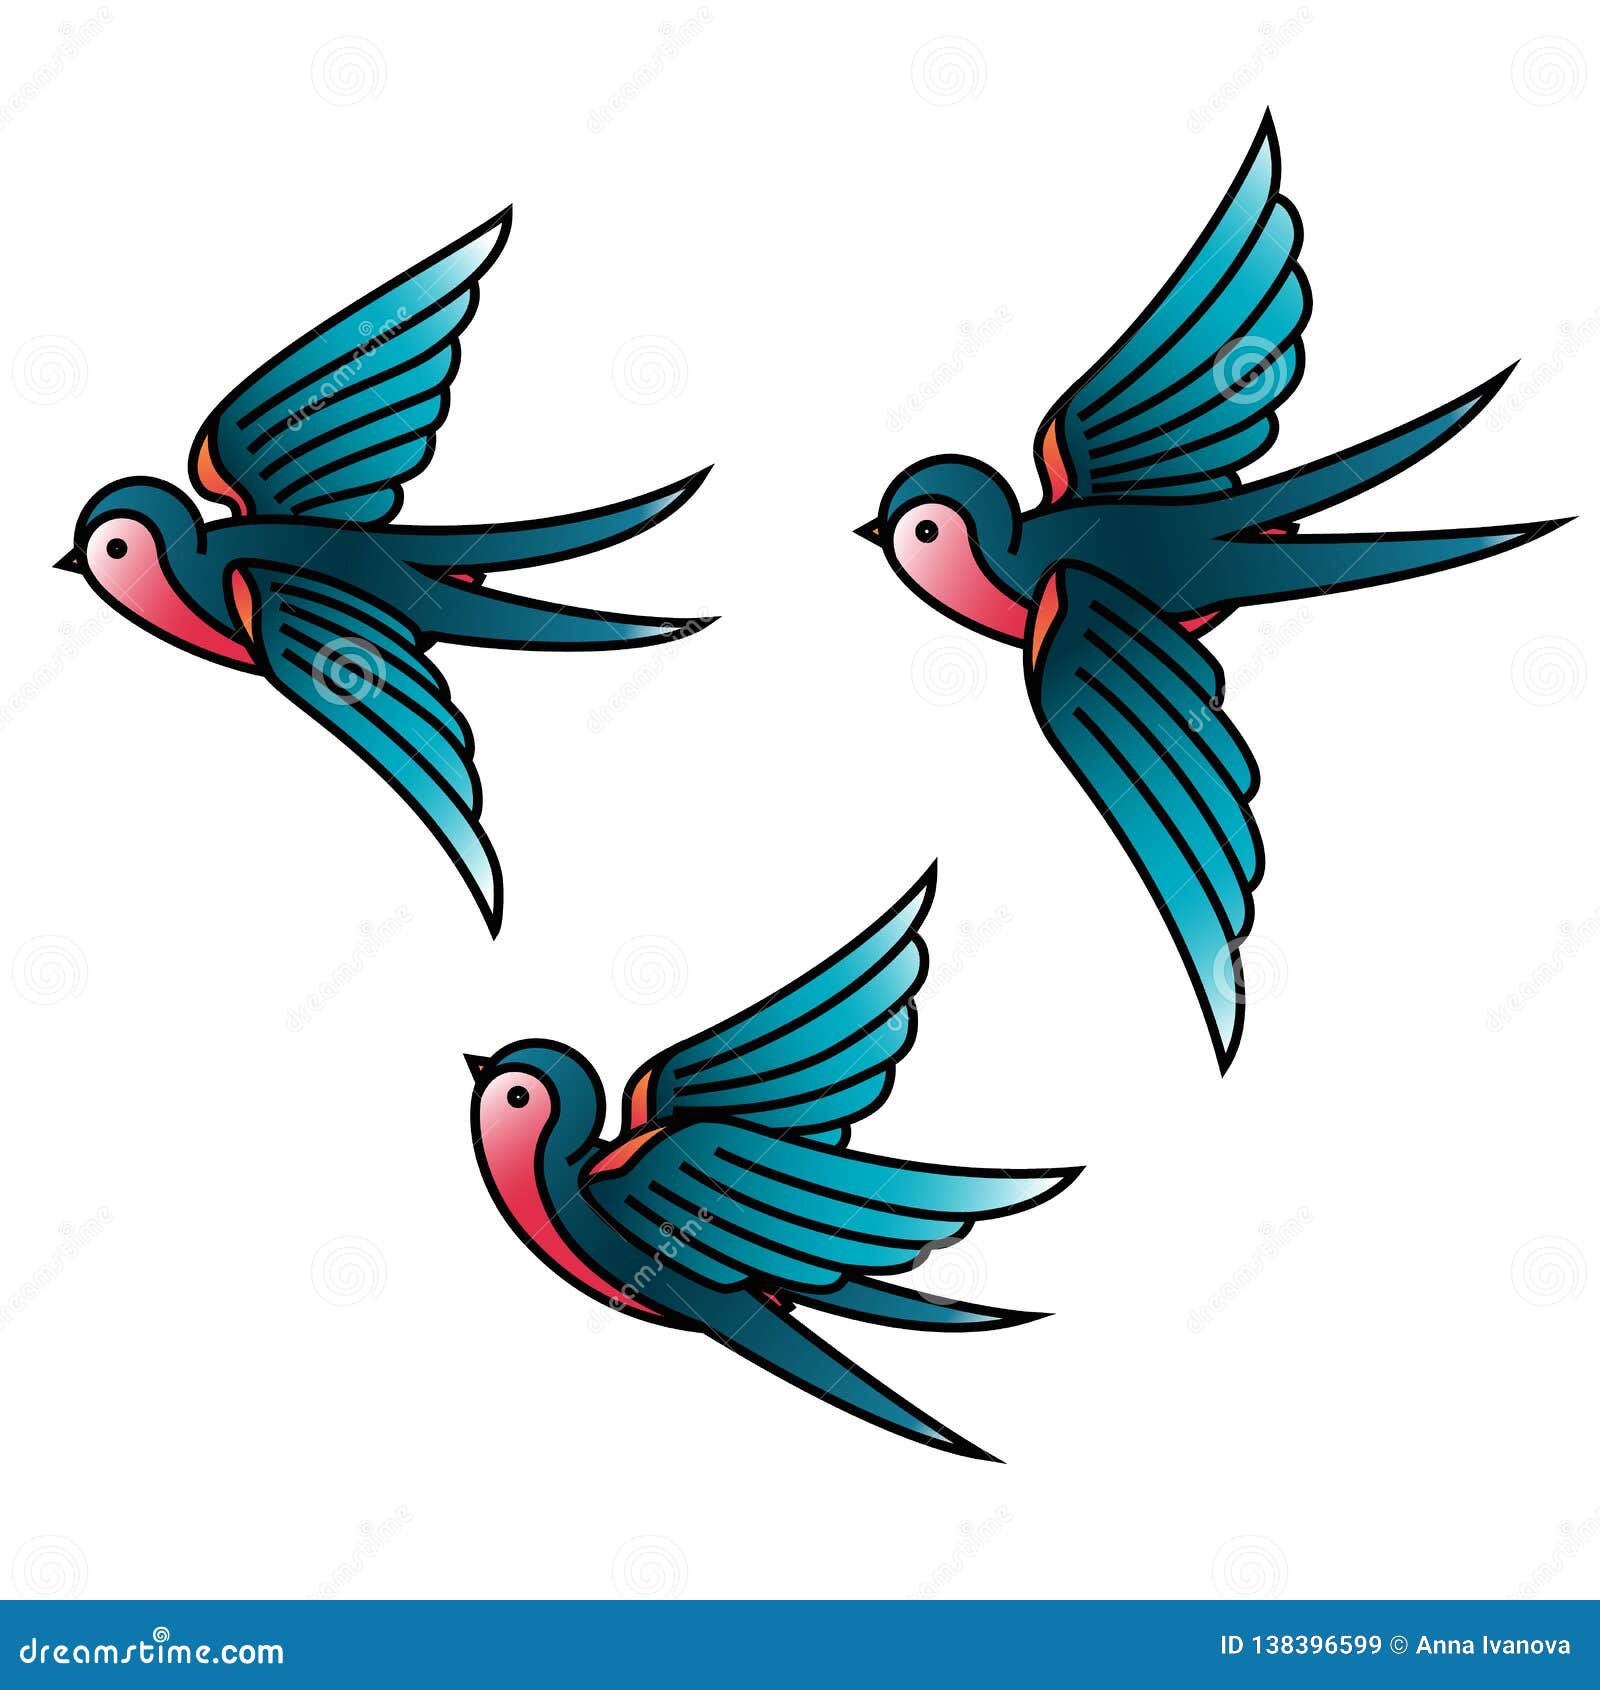 How to Draw a Group of Swallows in a Retro Tattoo Style